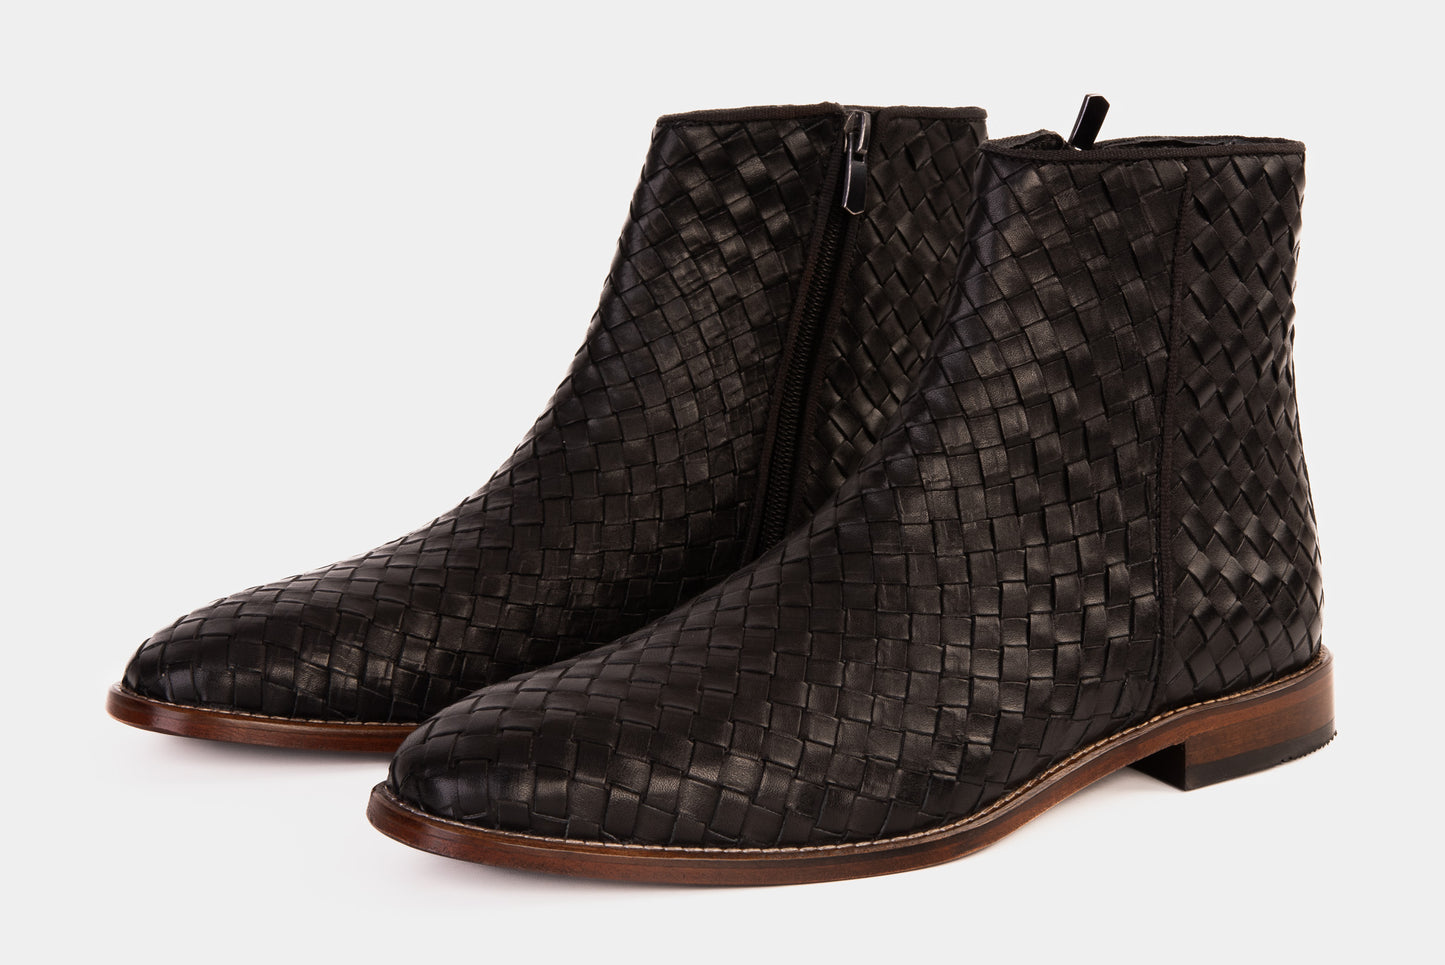 The Wellington Black Handwoven Leather Men Boot with a Zipper